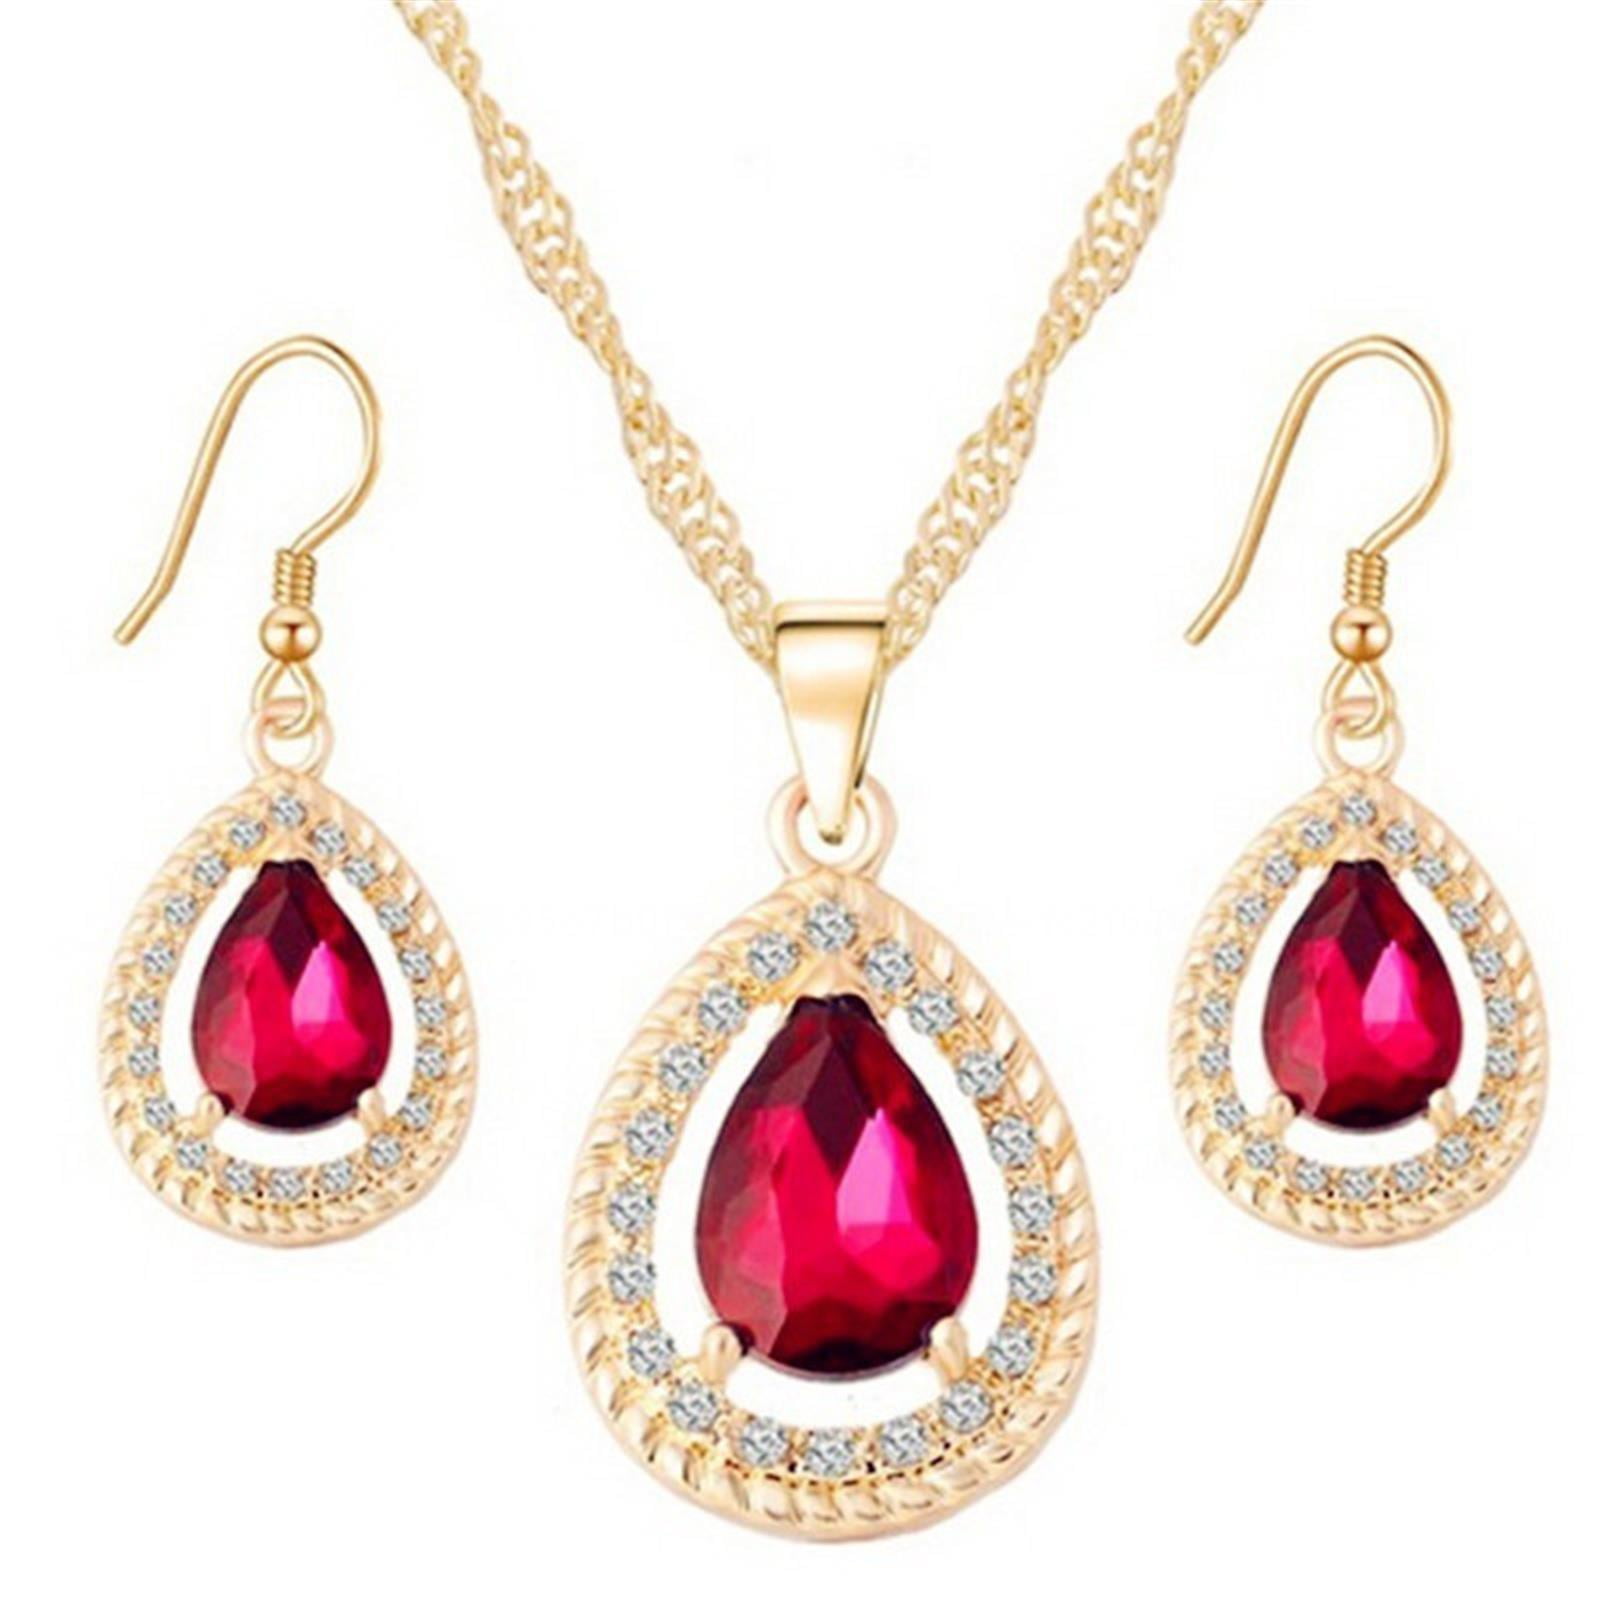  PowerFul-LOT Jewelry Sets for Teen Girls Earrings Necklace Set  Wedding Wedding Birthday Anniversary Dangle Earrings Collar Necklaces :  居家與廚房